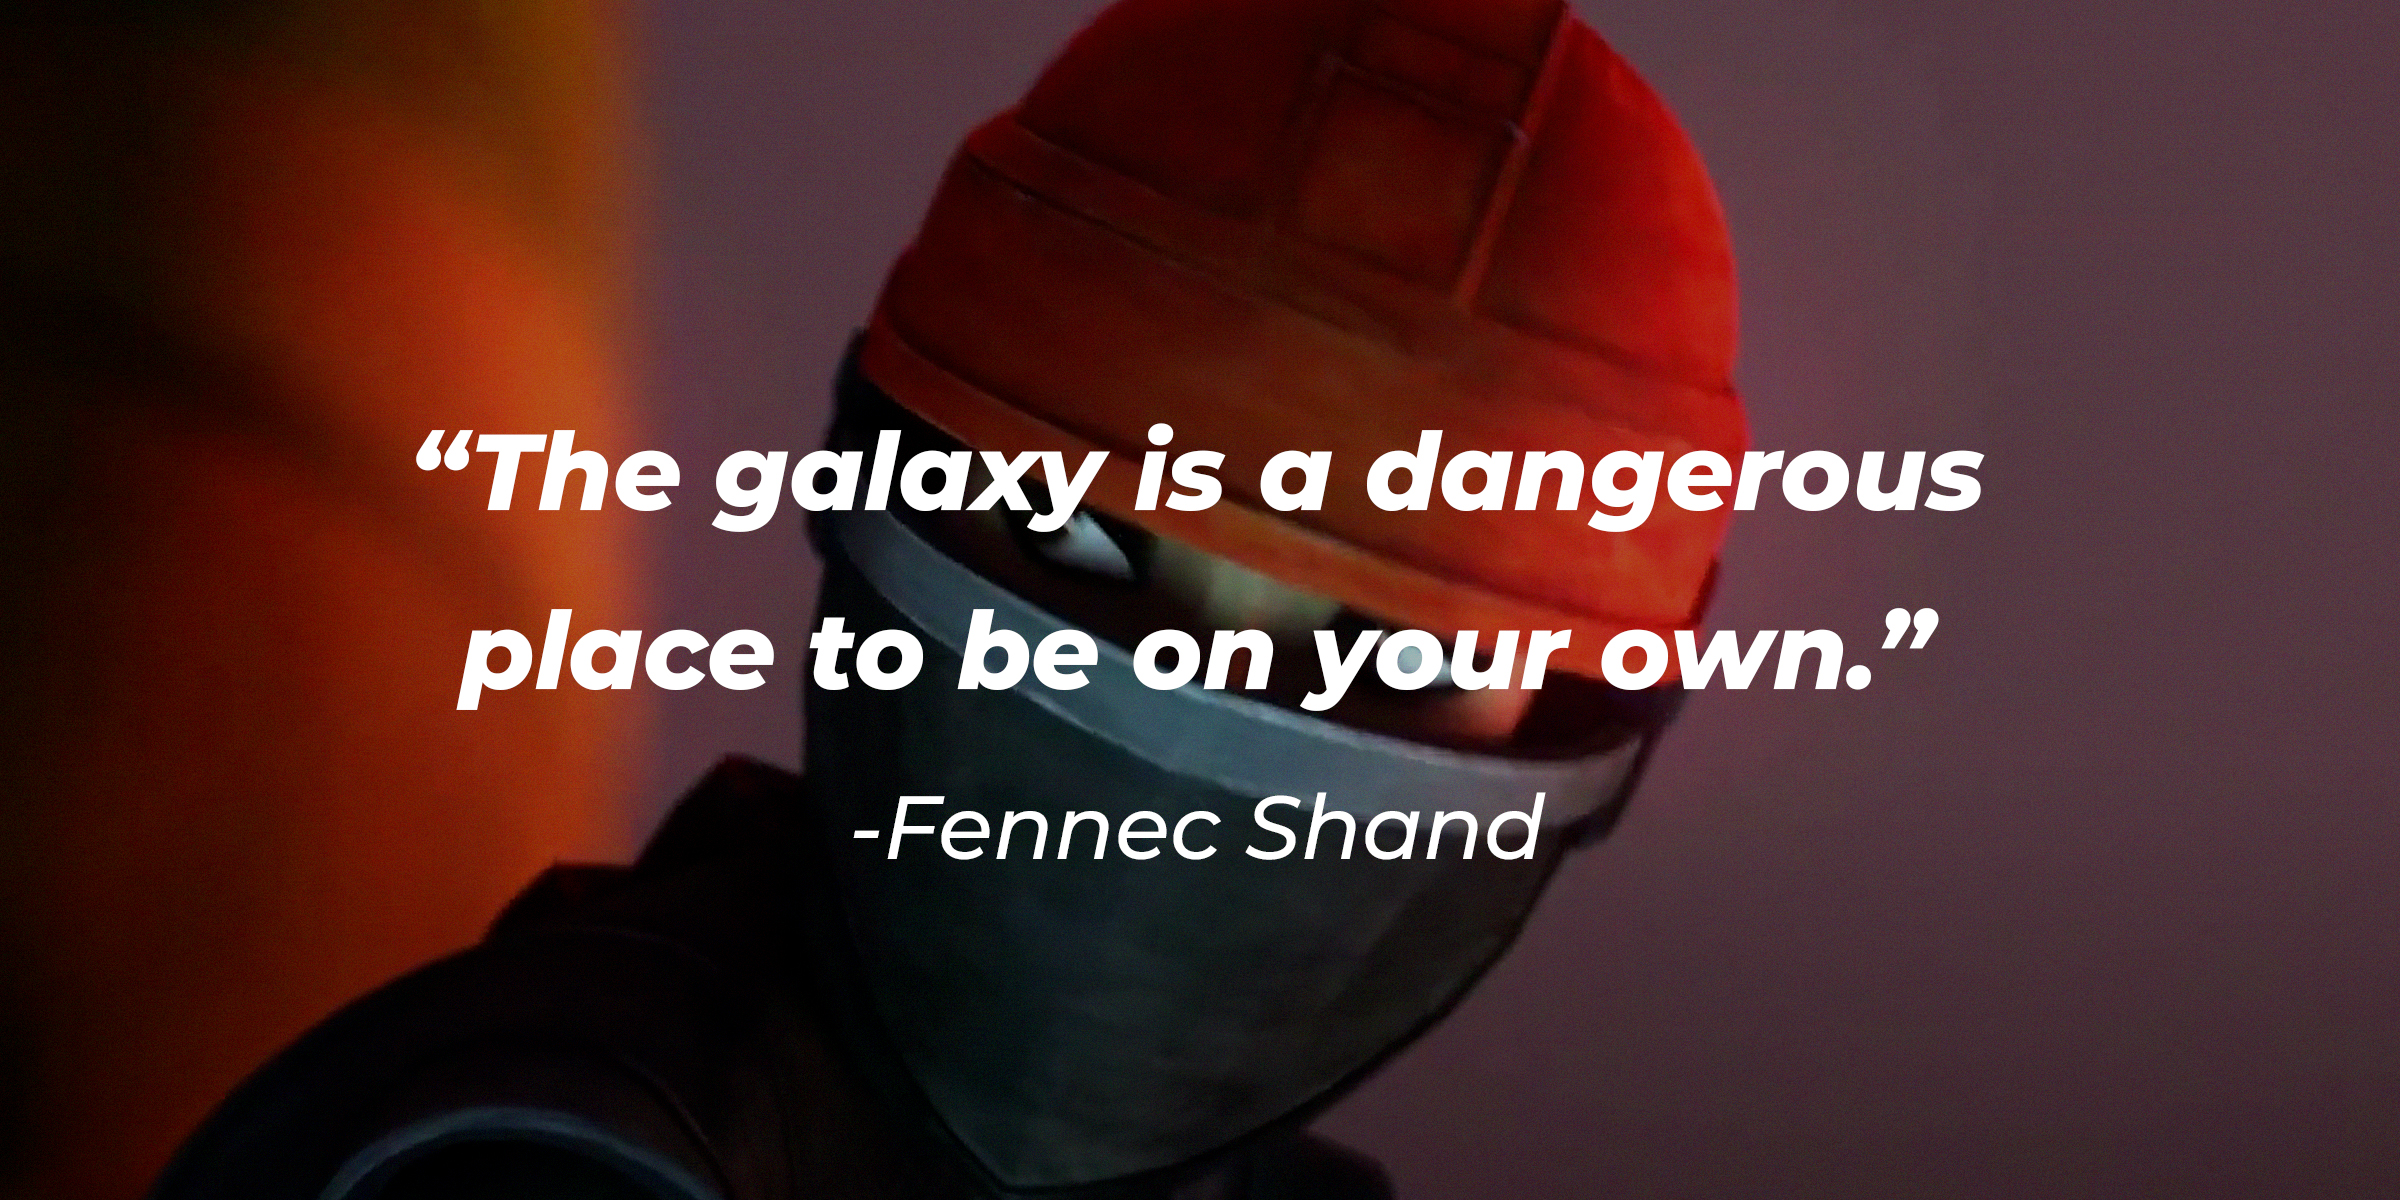 An image of a character from “Star Wars: The Bad Batch,” with the character Fennec Shand’s quote: “The galaxy is a dangerous place to be on your own.” | Source: Facebook.com/StarWars